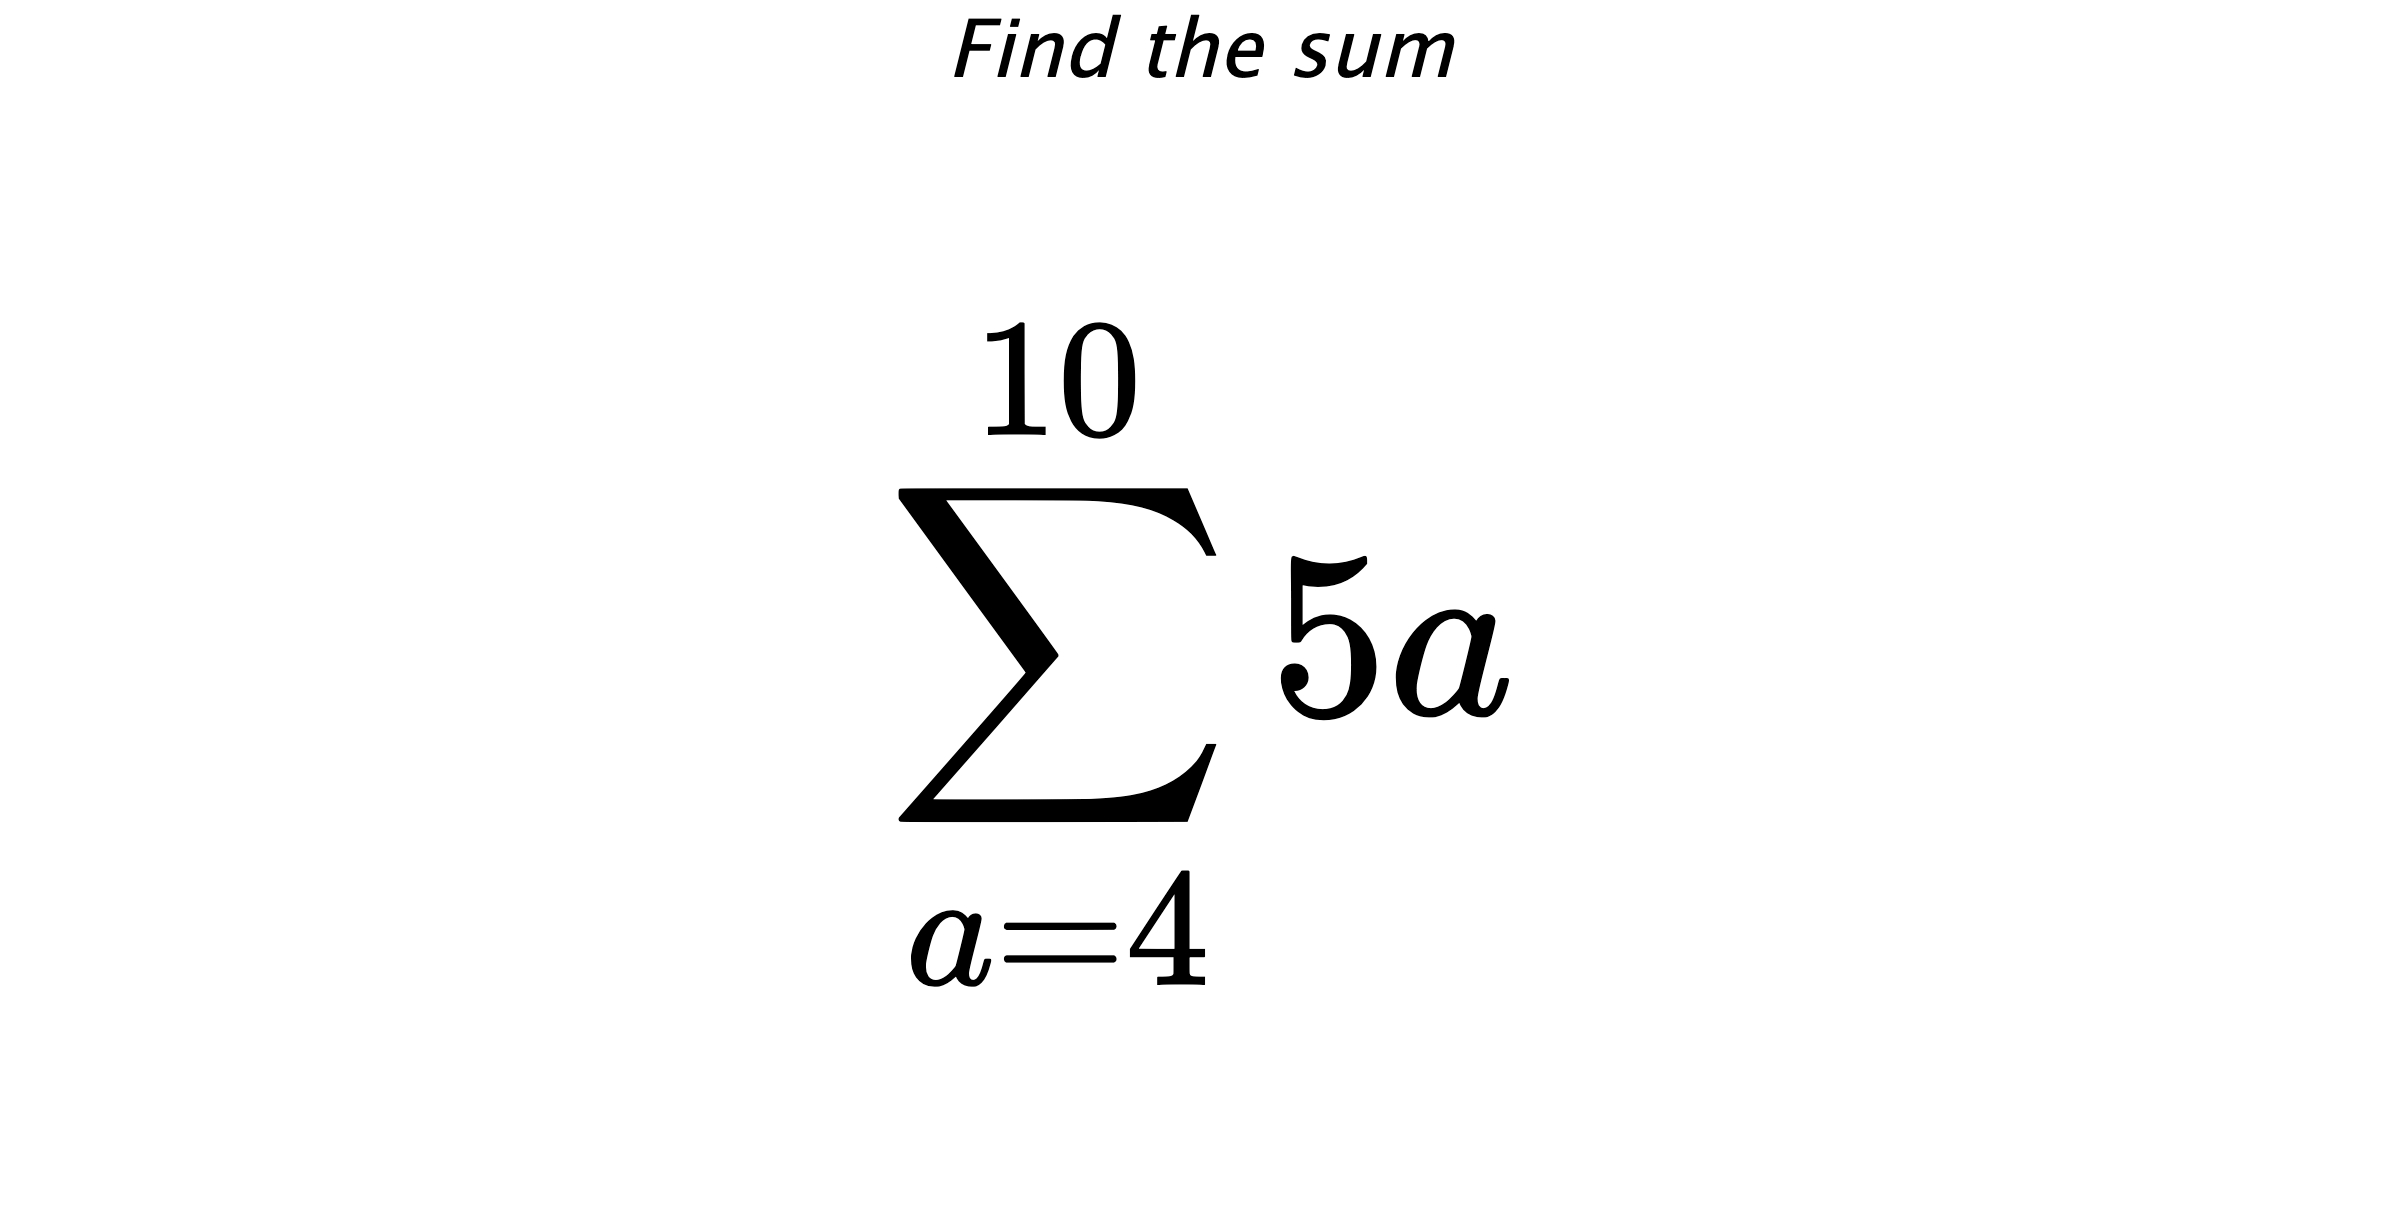 Find the sum $$ \sum_{a=4}^{10} 5a$$